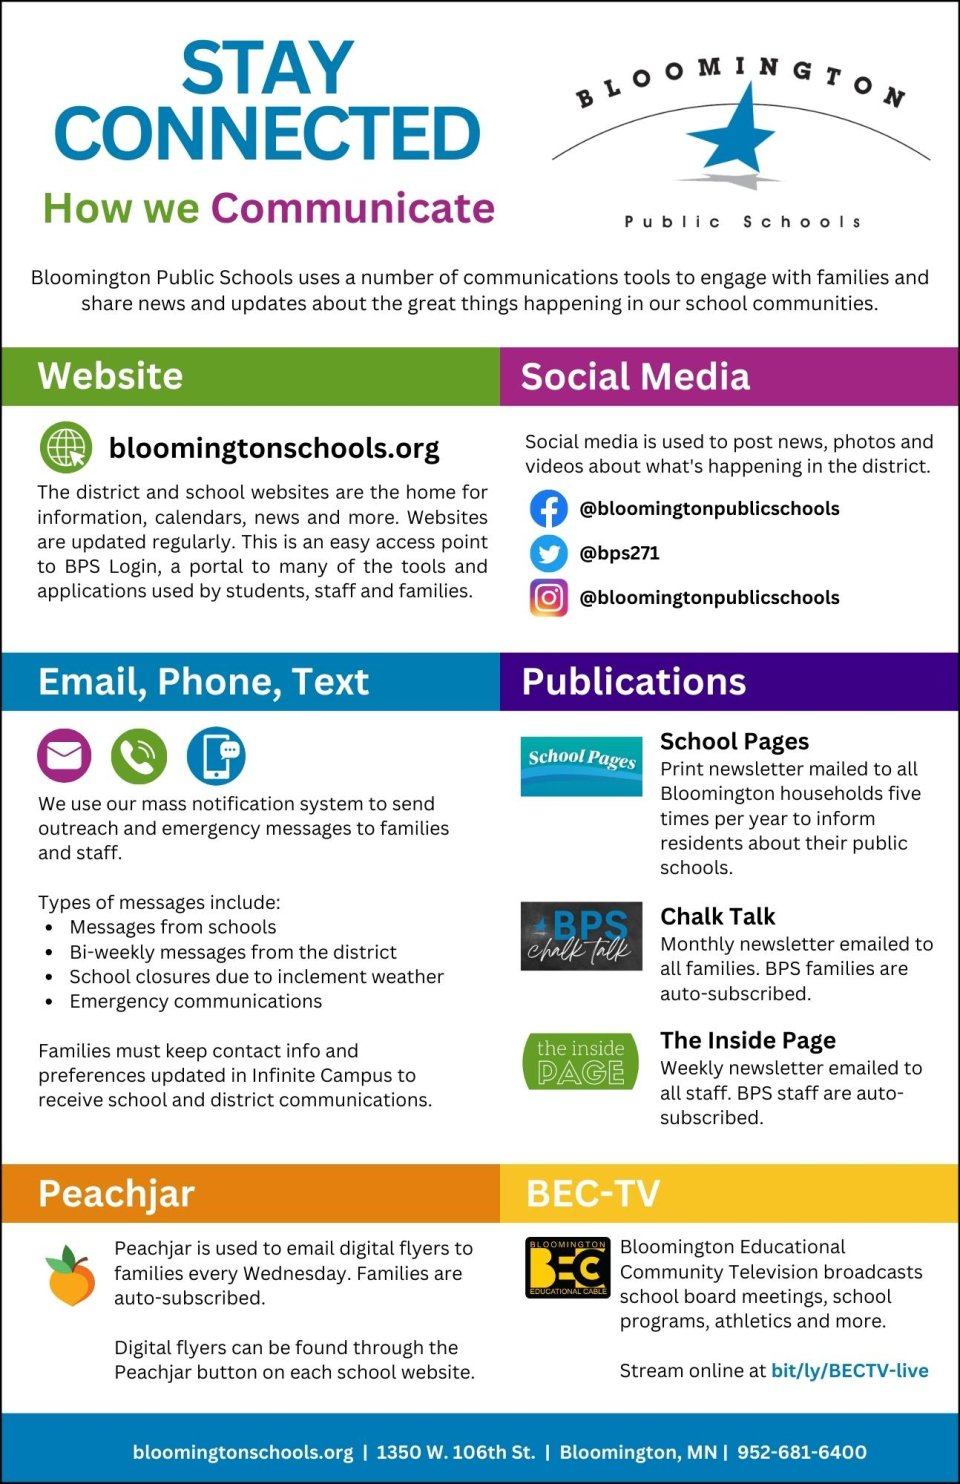 infographic showing all the publications and ways Bloomington Public Schools communicates with its community